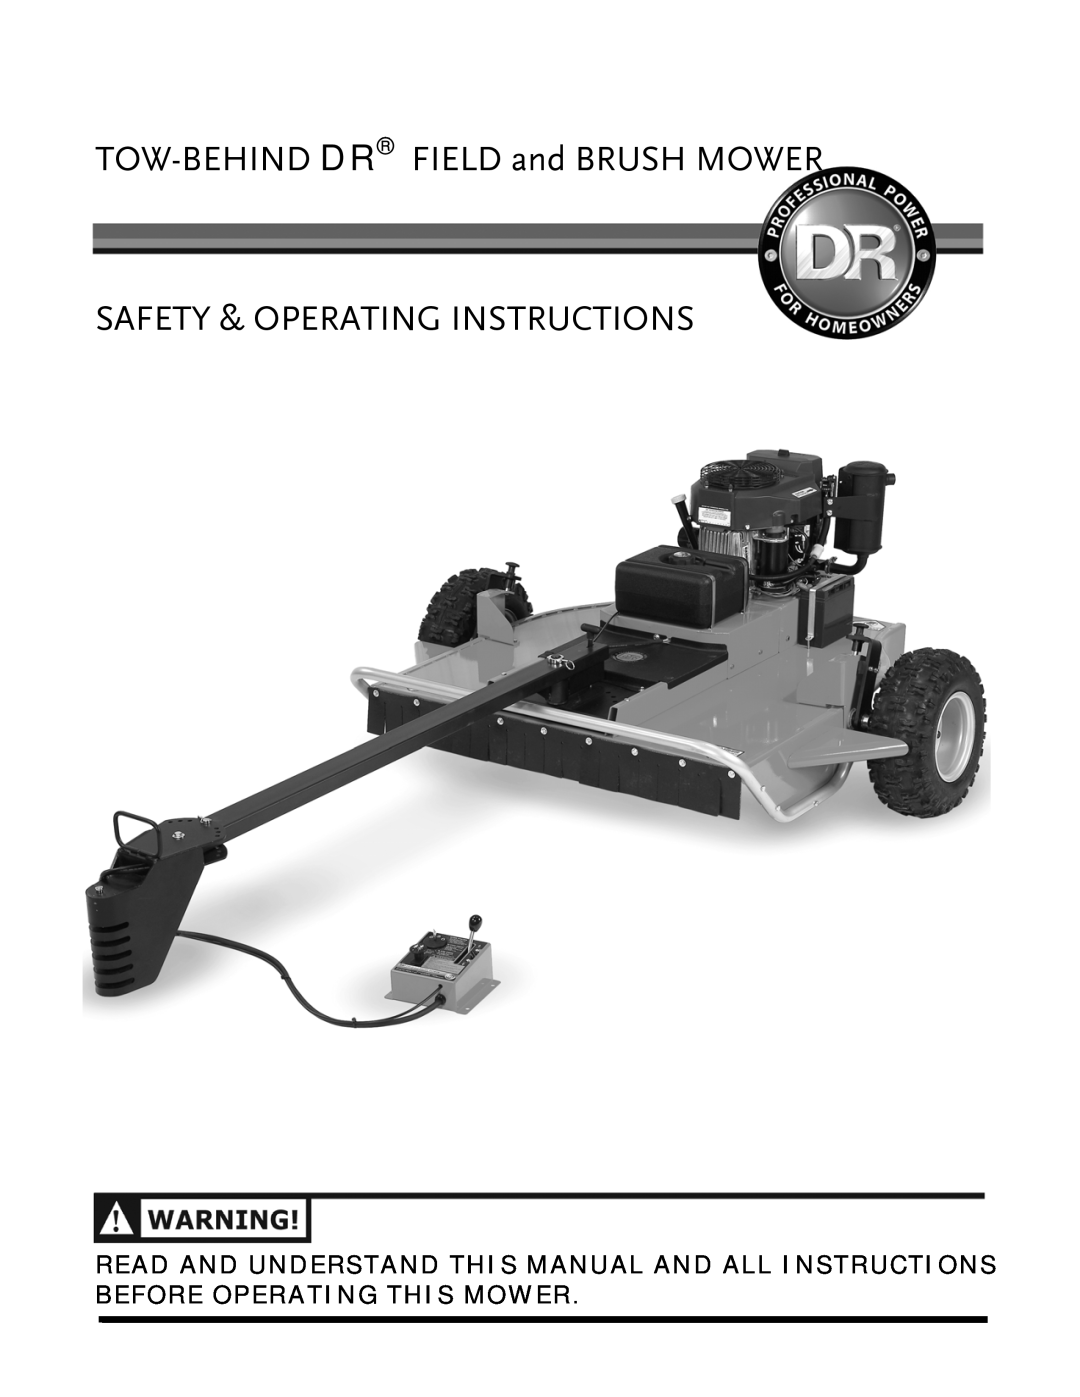 Briggs & Stratton manual TOW-BEHIND DR FIELD and BRUSH MOWER, Safety & Operating Instructions 